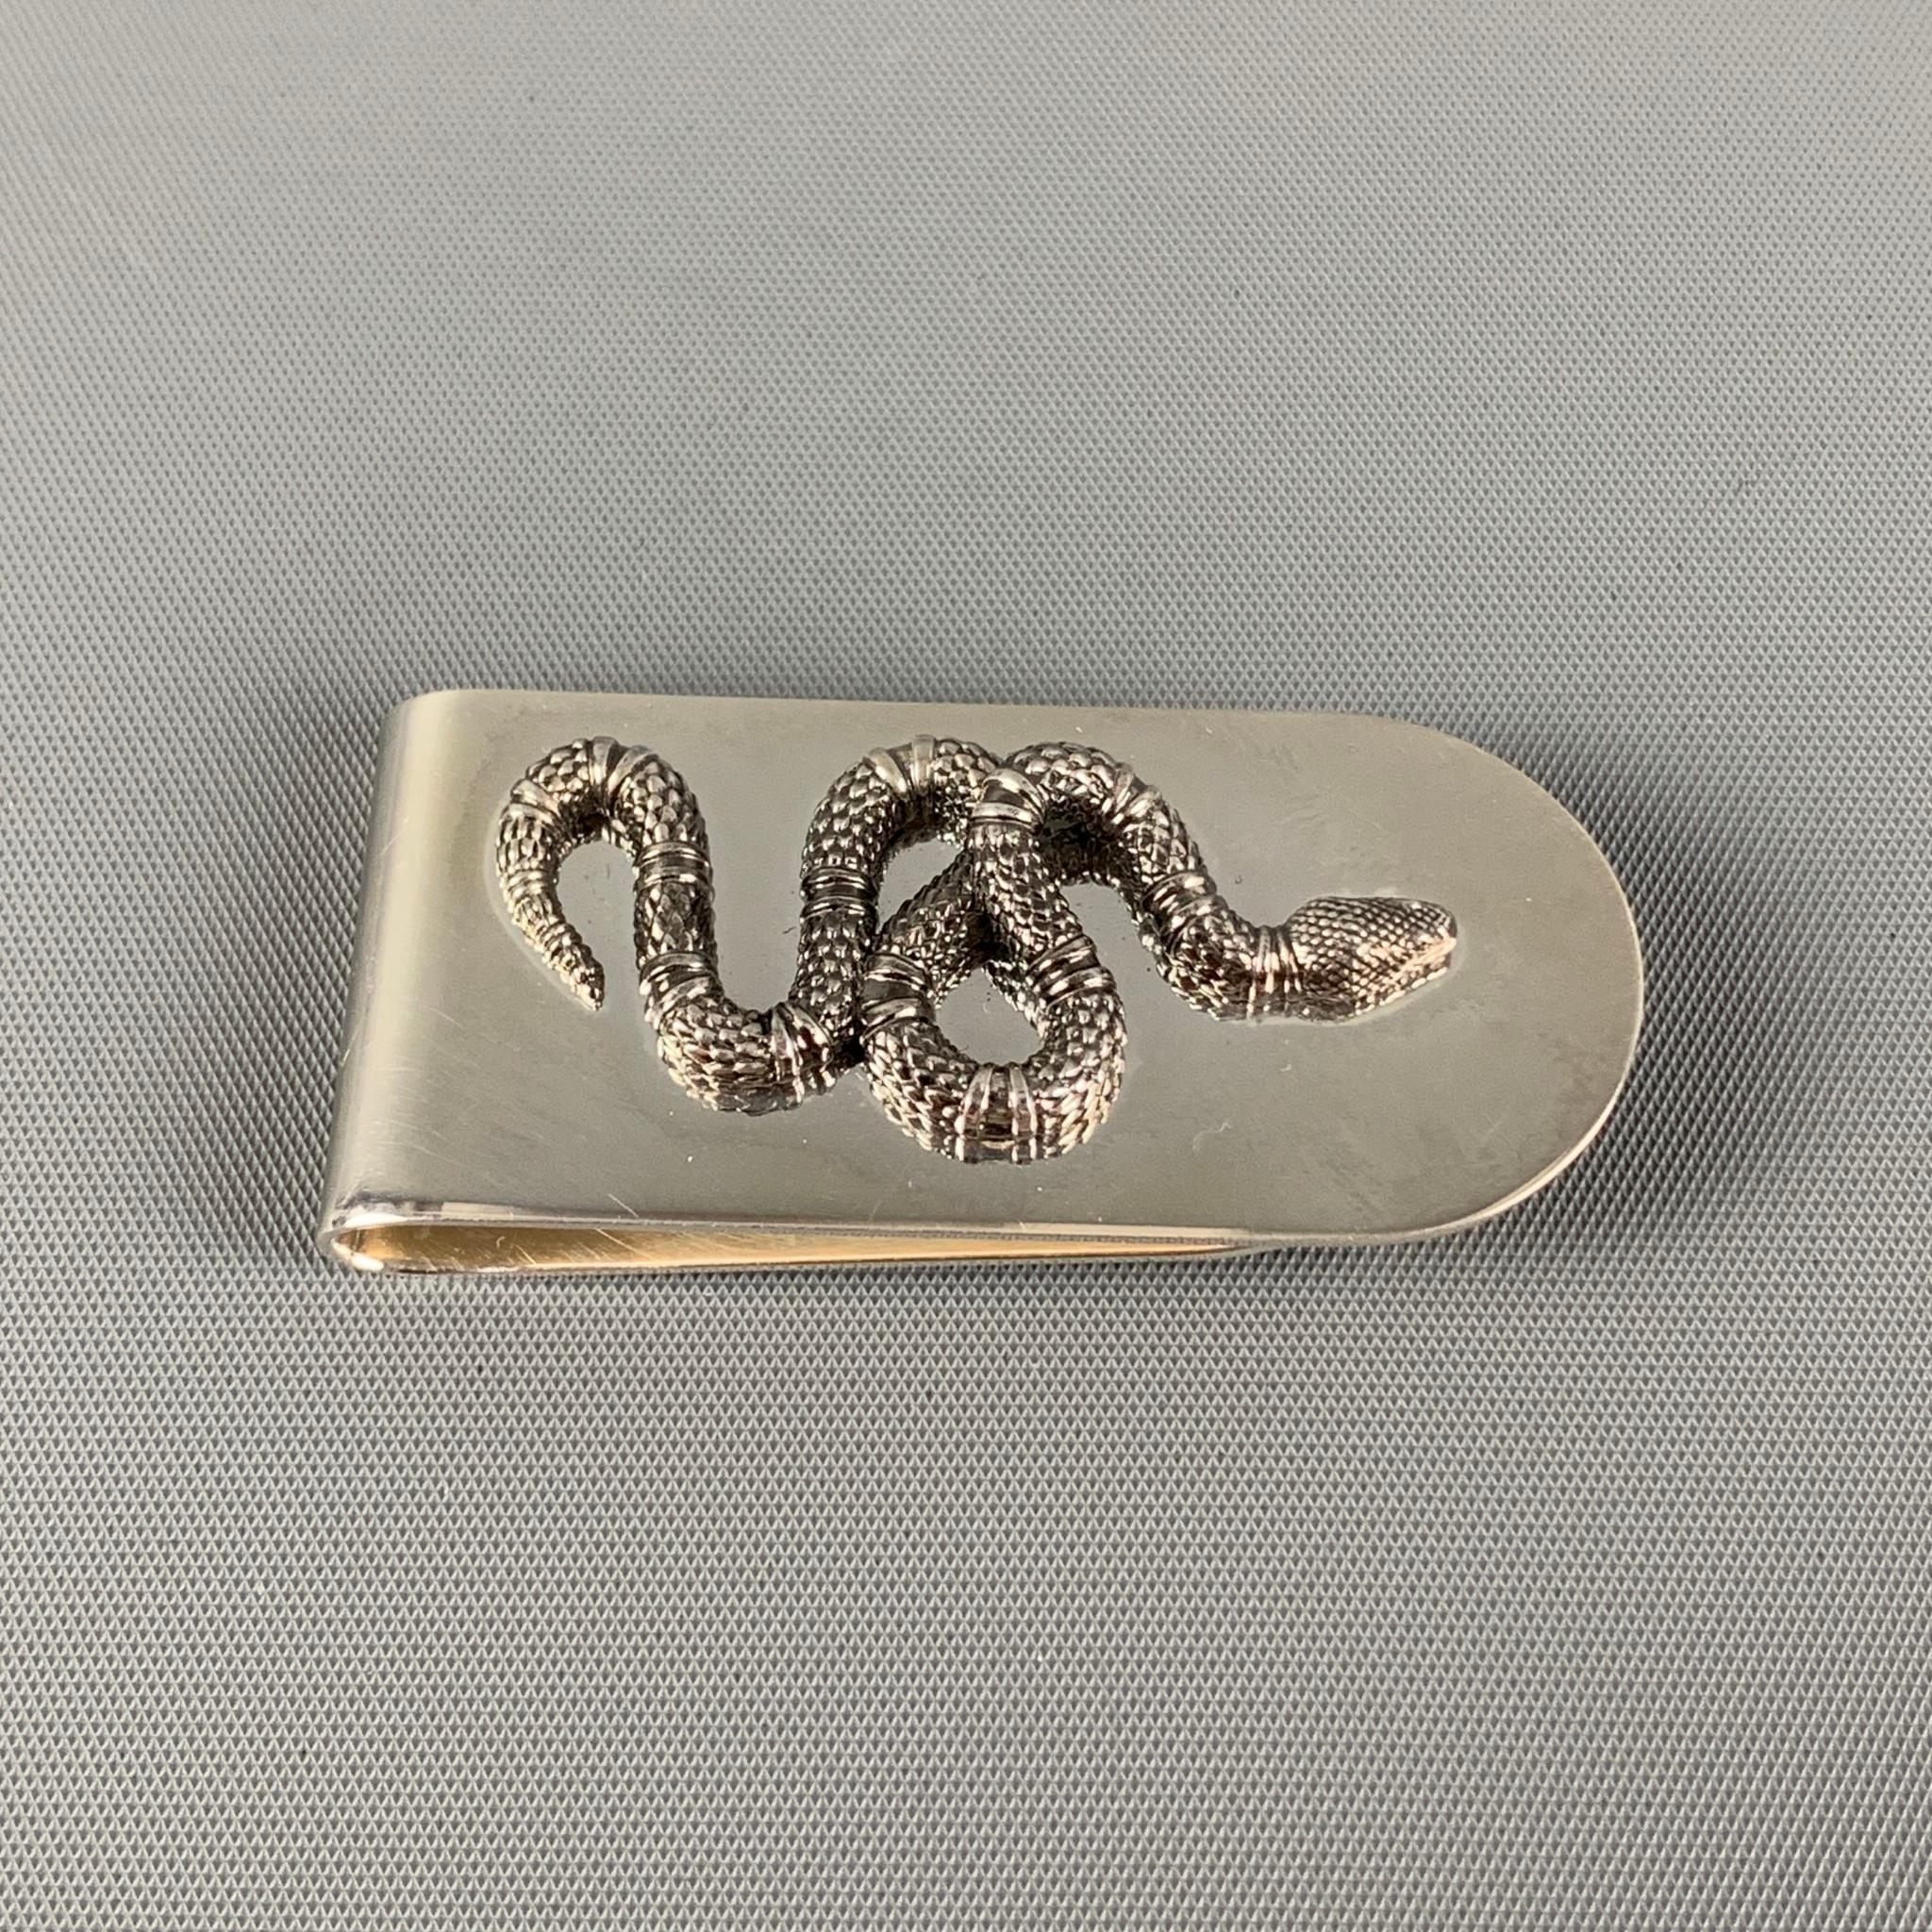 GUCCI money clip comes in a sterling silver featuring a snake motif. Made in Italy. 

New with box.
Marked: 925
Original Retail Price: $350.00

Measurements:
5.5 cm. x 2.5 cm.